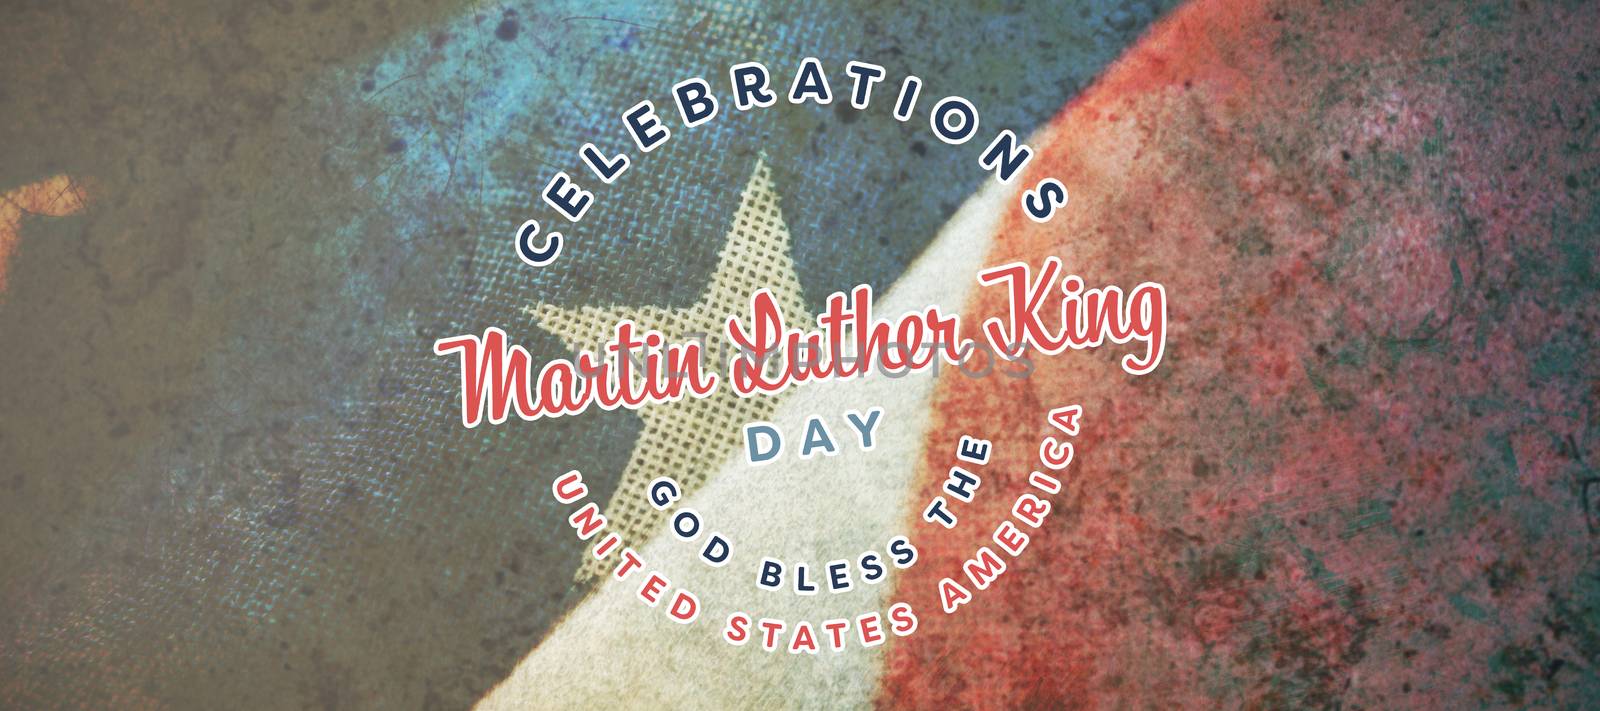 Martin Luther king day against close-up of wrinkled national flag